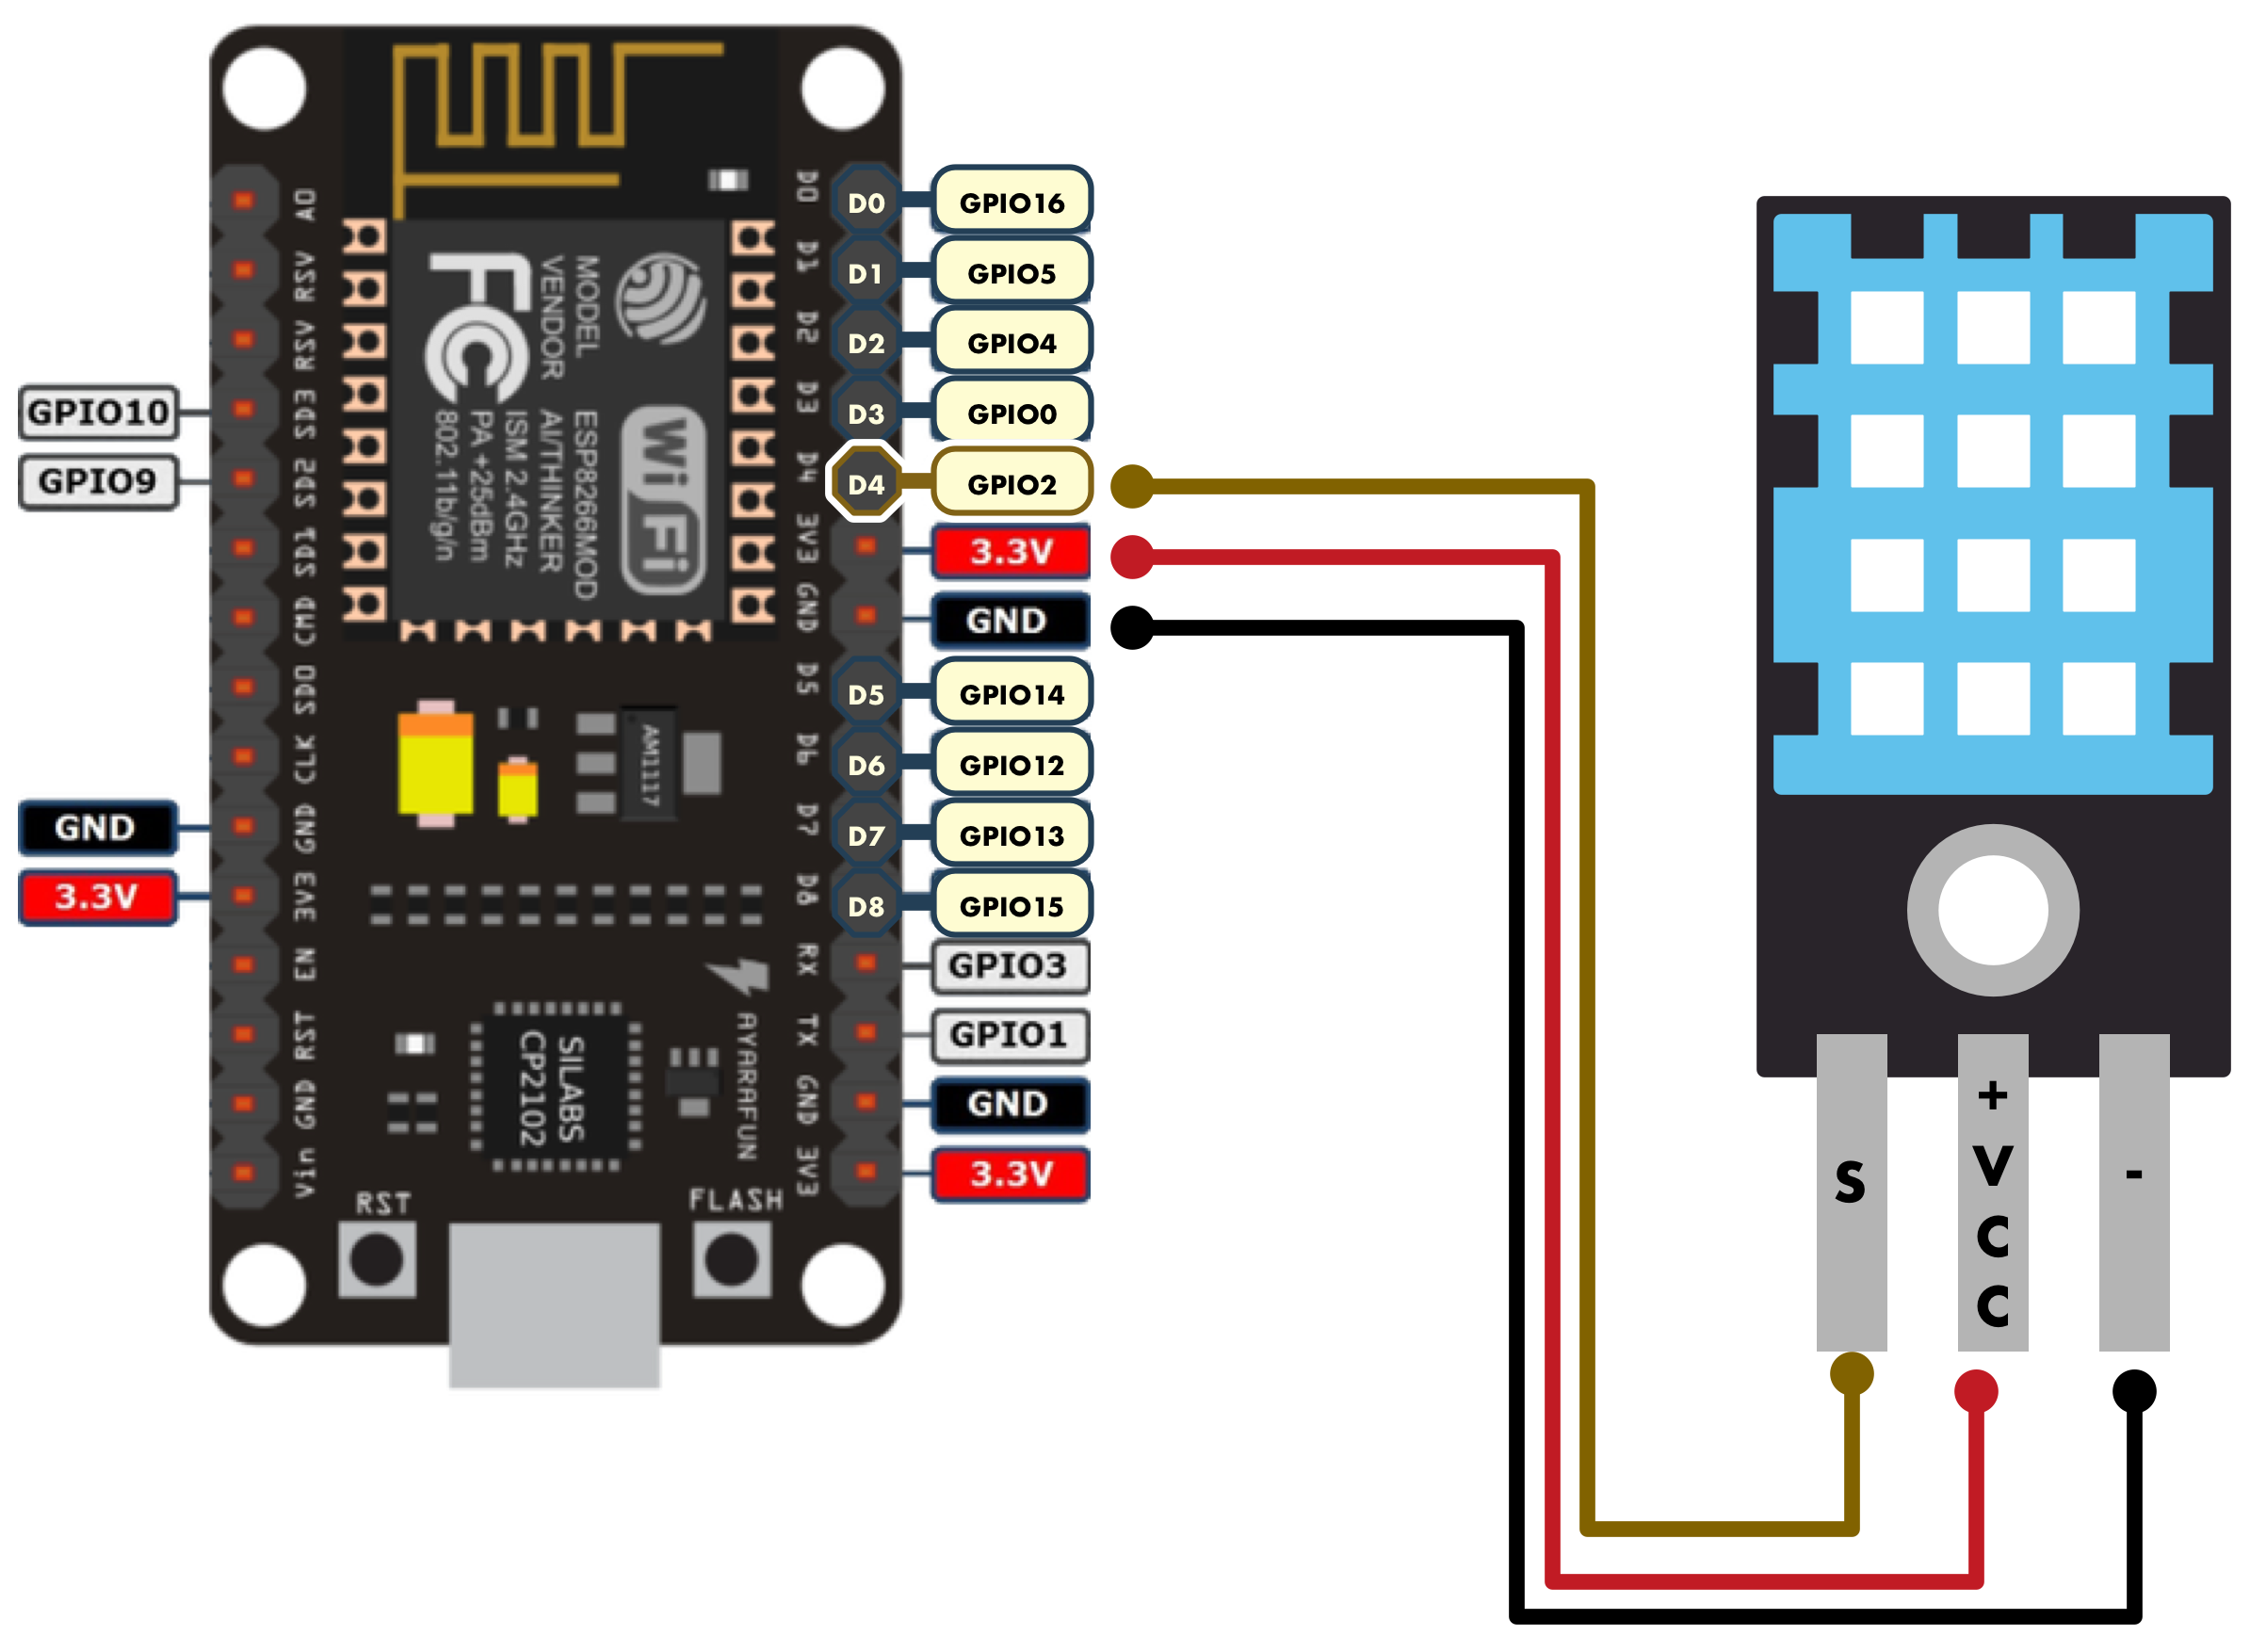 Dht11 Sensor With Esp8266nodemcu Using Arduino Ide How To 40 Off